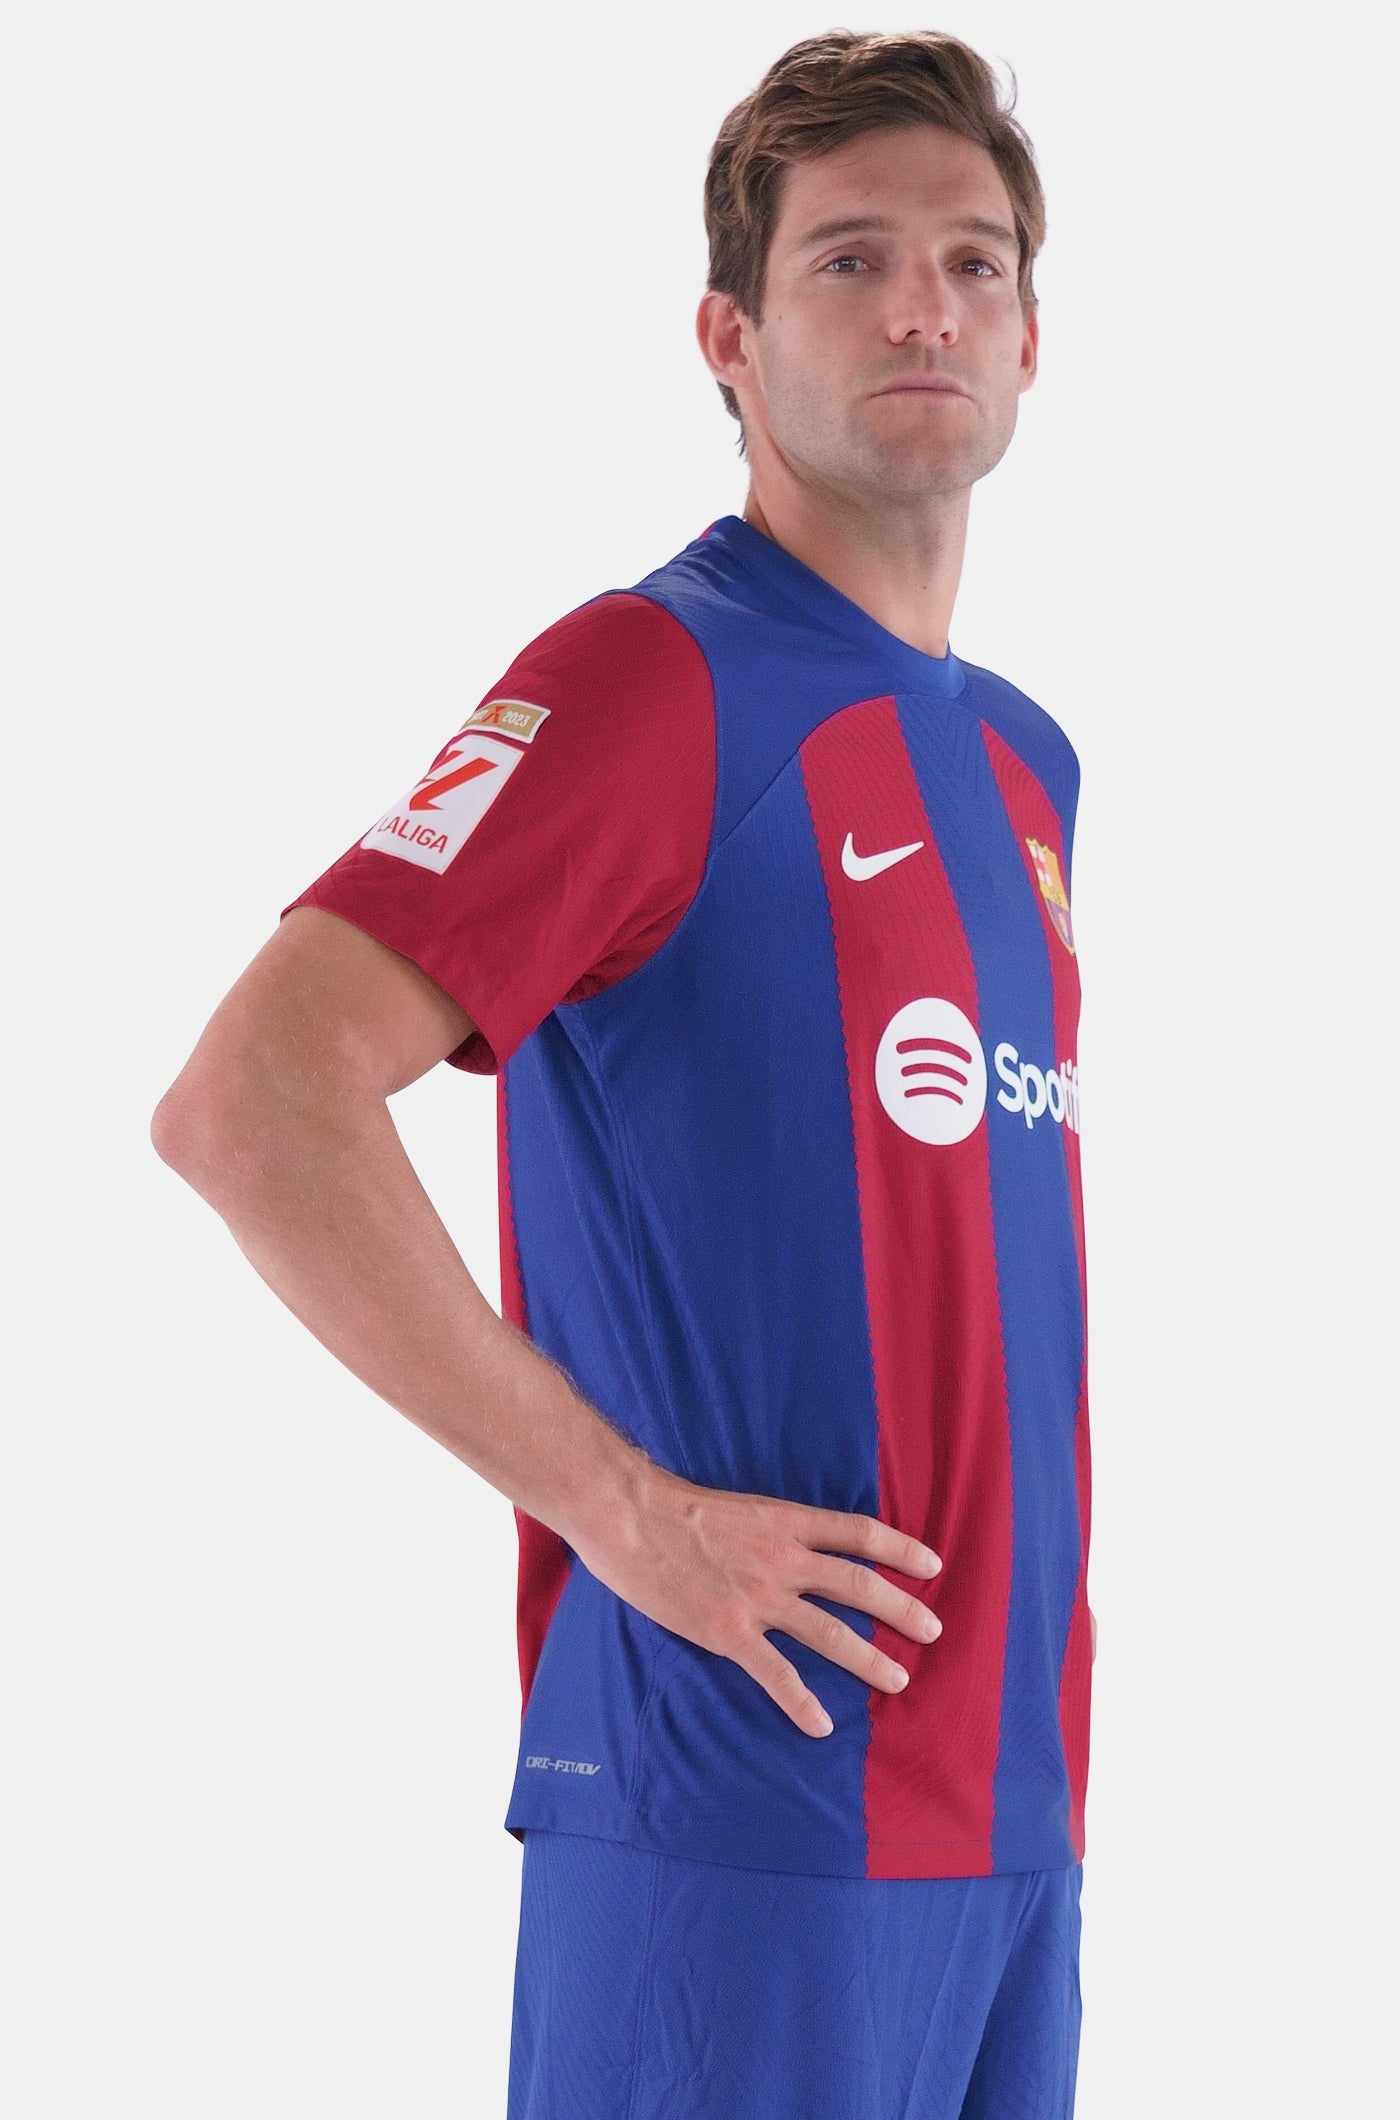 LFP FC Barcelona home shirt 23/24 Player's Edition - MARCOS A.